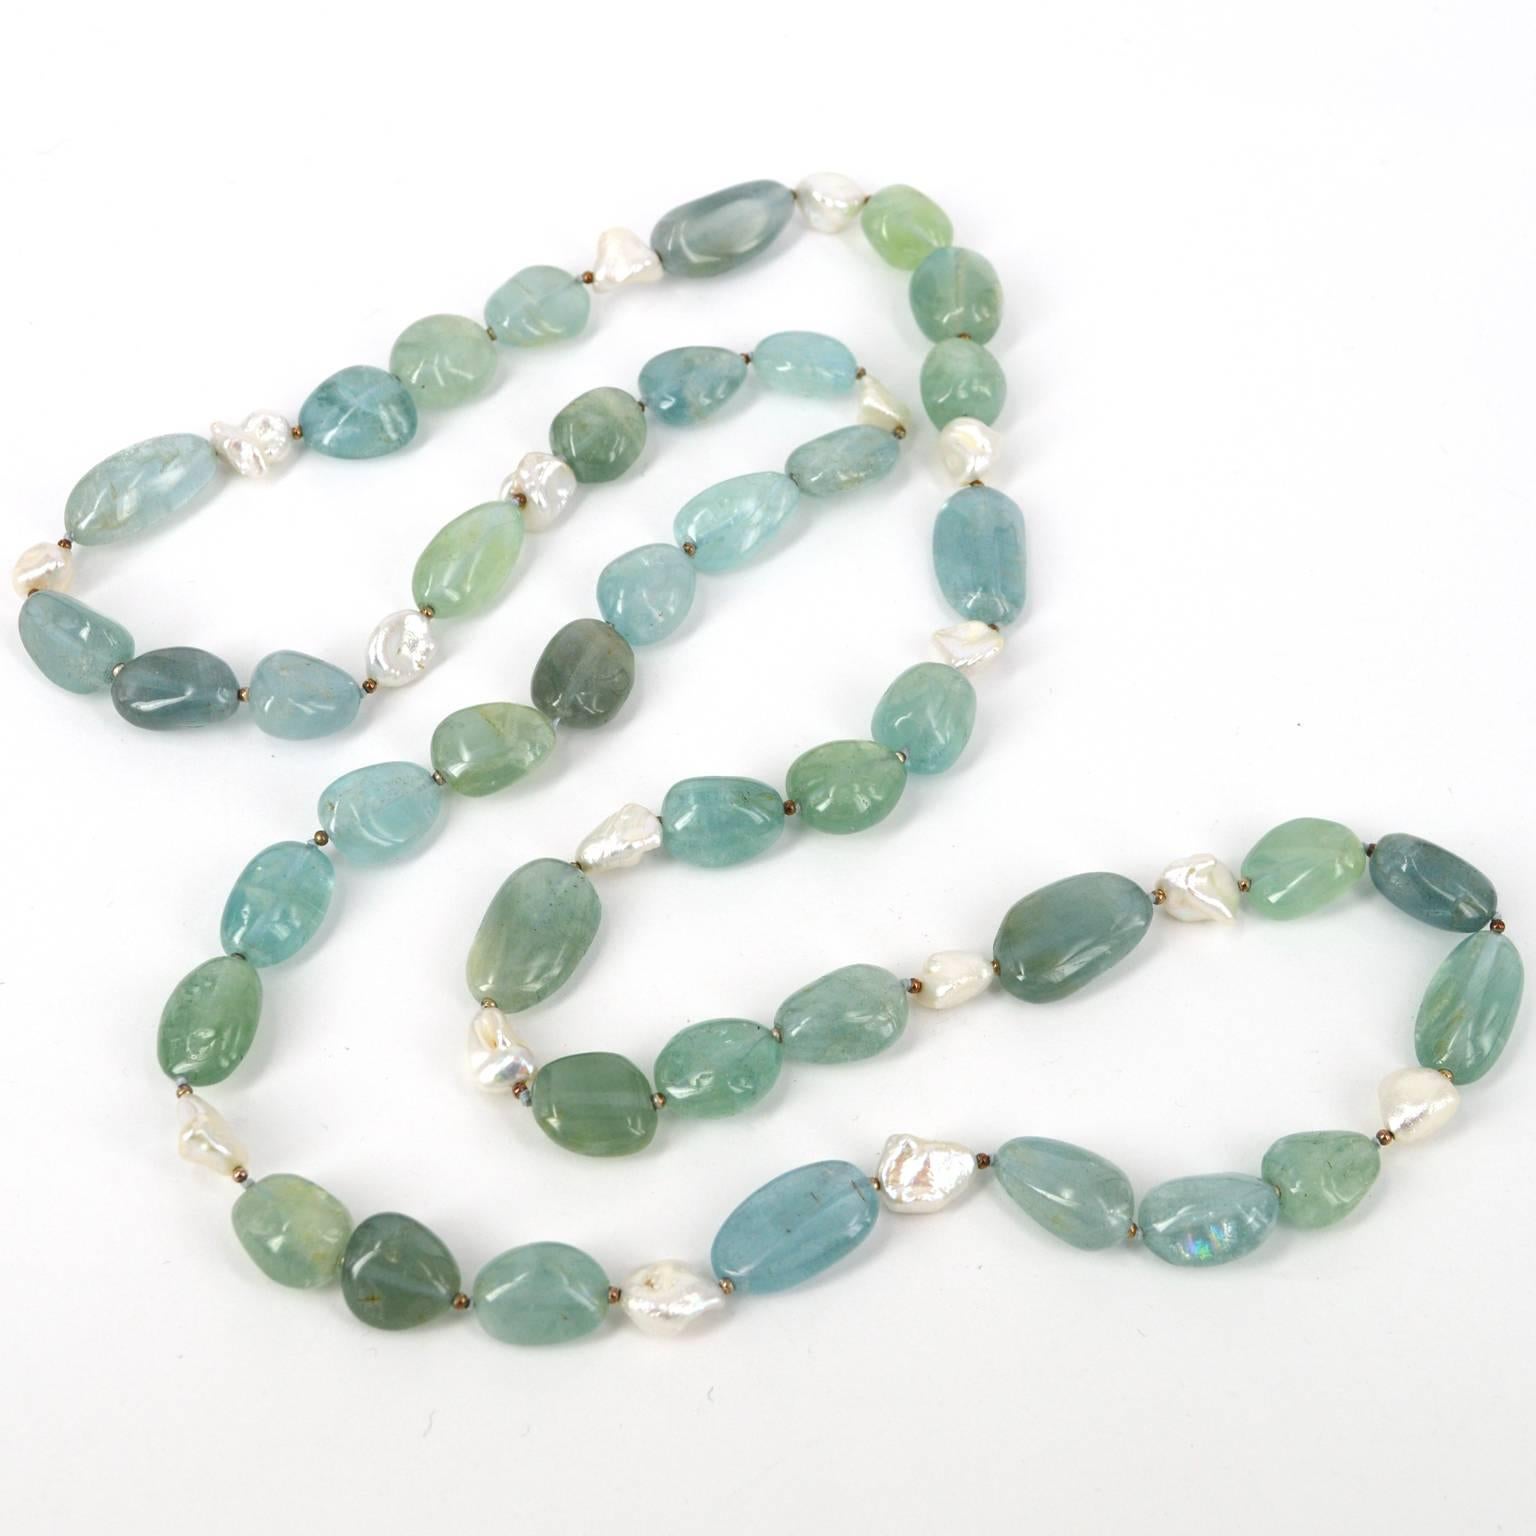 Blue, Greens and Aquas of this natural Aquamarine nugget hand knotted necklace are spaced with 16 x 10mm Keshi Fresh Water Pearls and spaced by oxidised 2mm Sterling Silver beads. Aquamarine nuggets range from 12x15mm up to 12x24mm.
All stones are